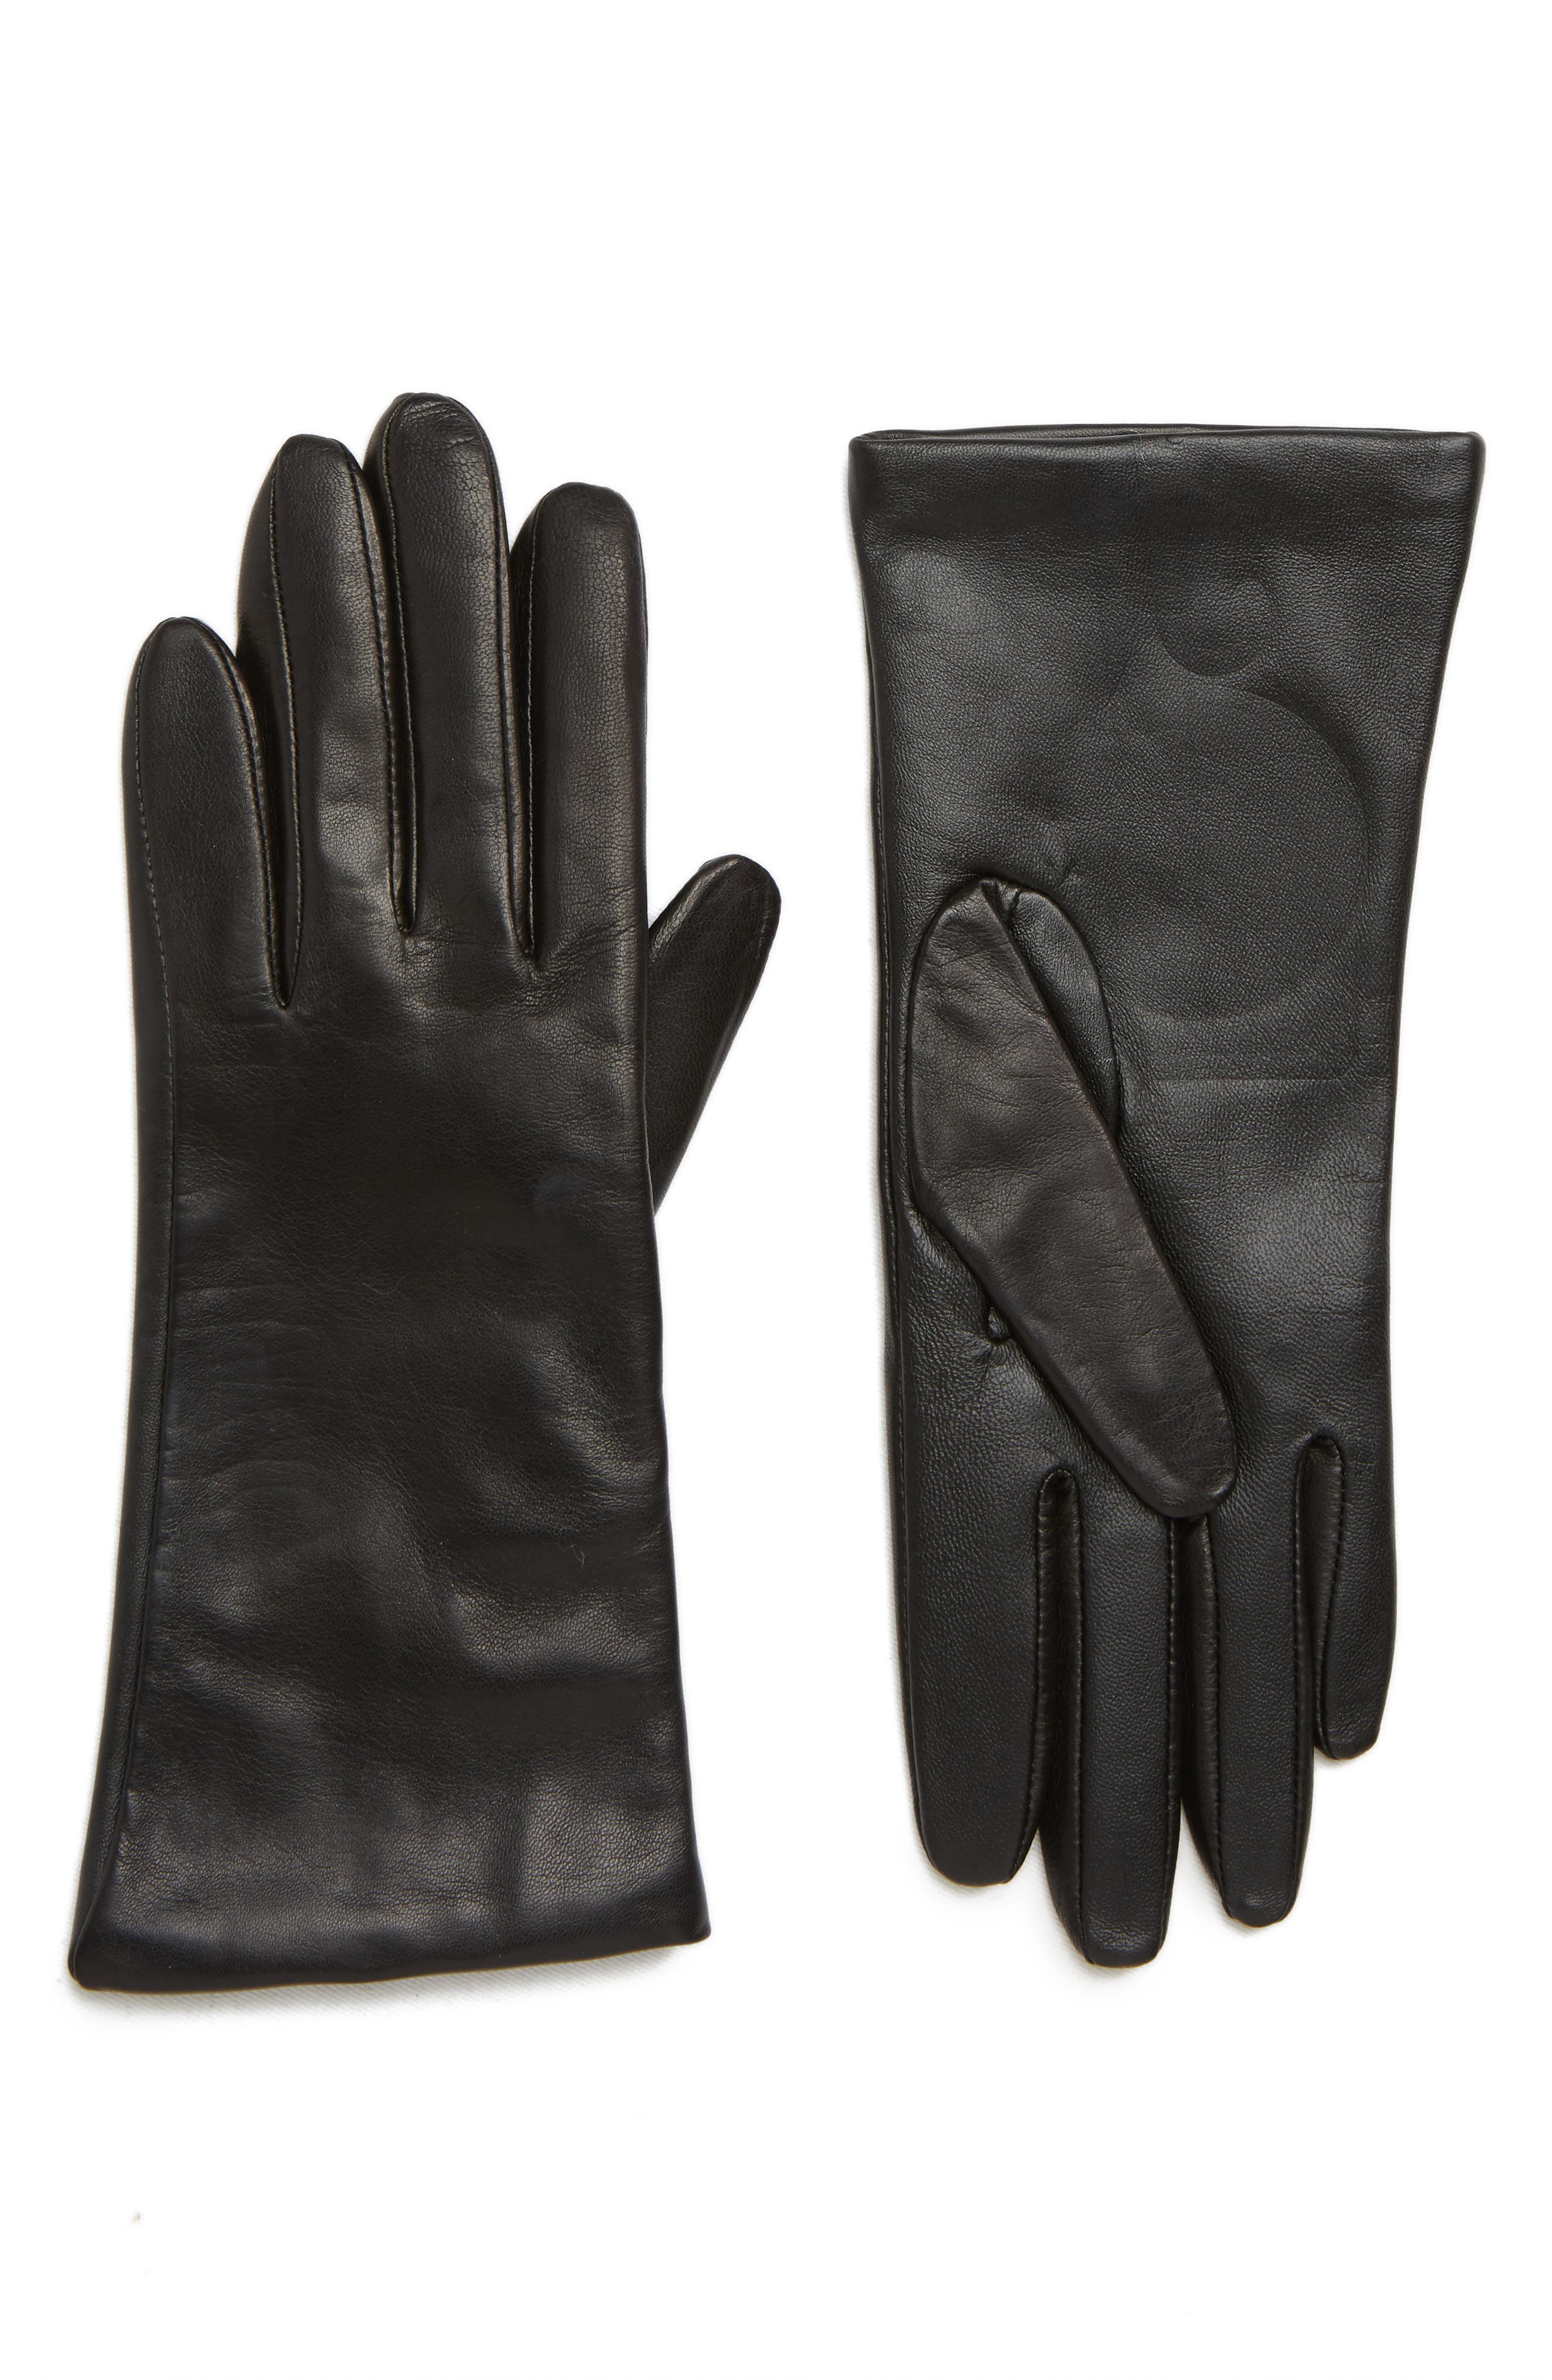 Downholme Touchscreen Leather Cashmere Lined Gloves for Women